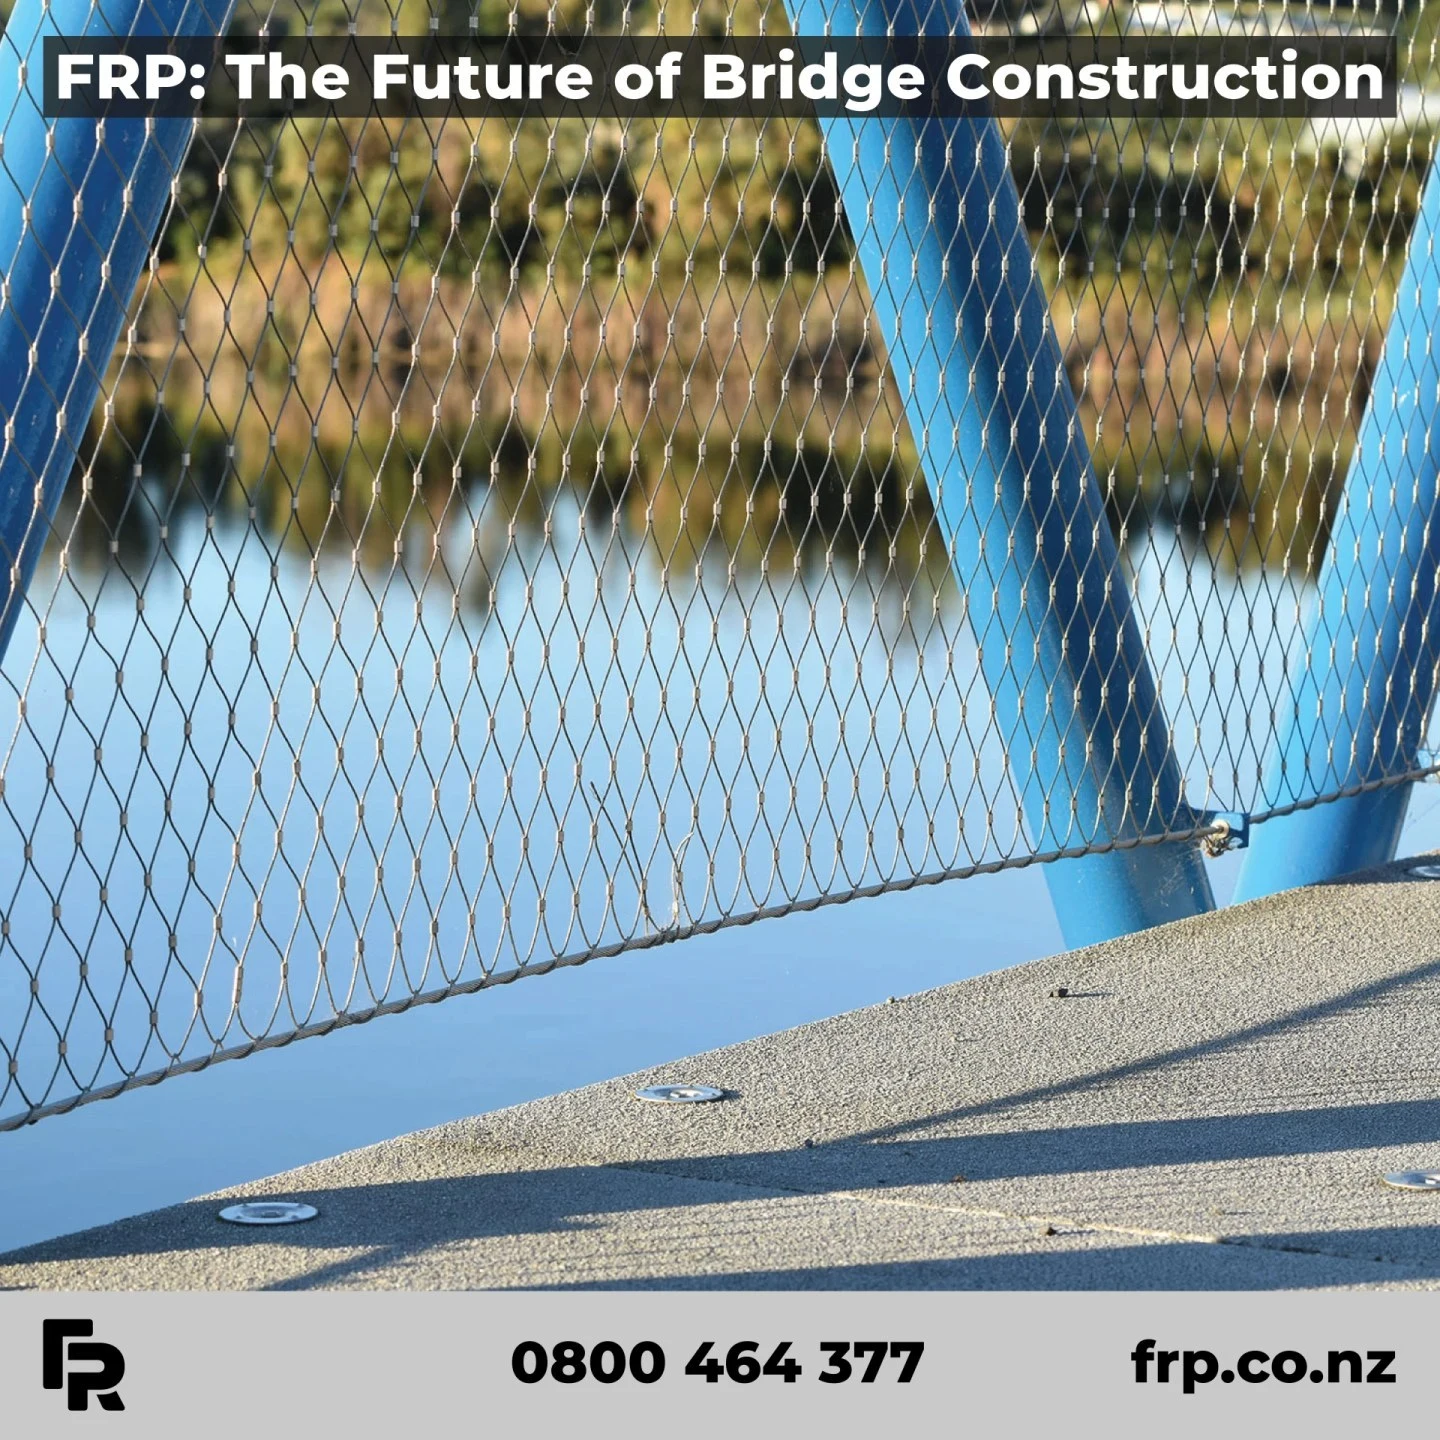 Enquire for Cover Top Grating.

#frp #frpproducts #bridges #nzconstruction #nzarchitects #commercial #civil #engineers #engineering #walkways #cycleways